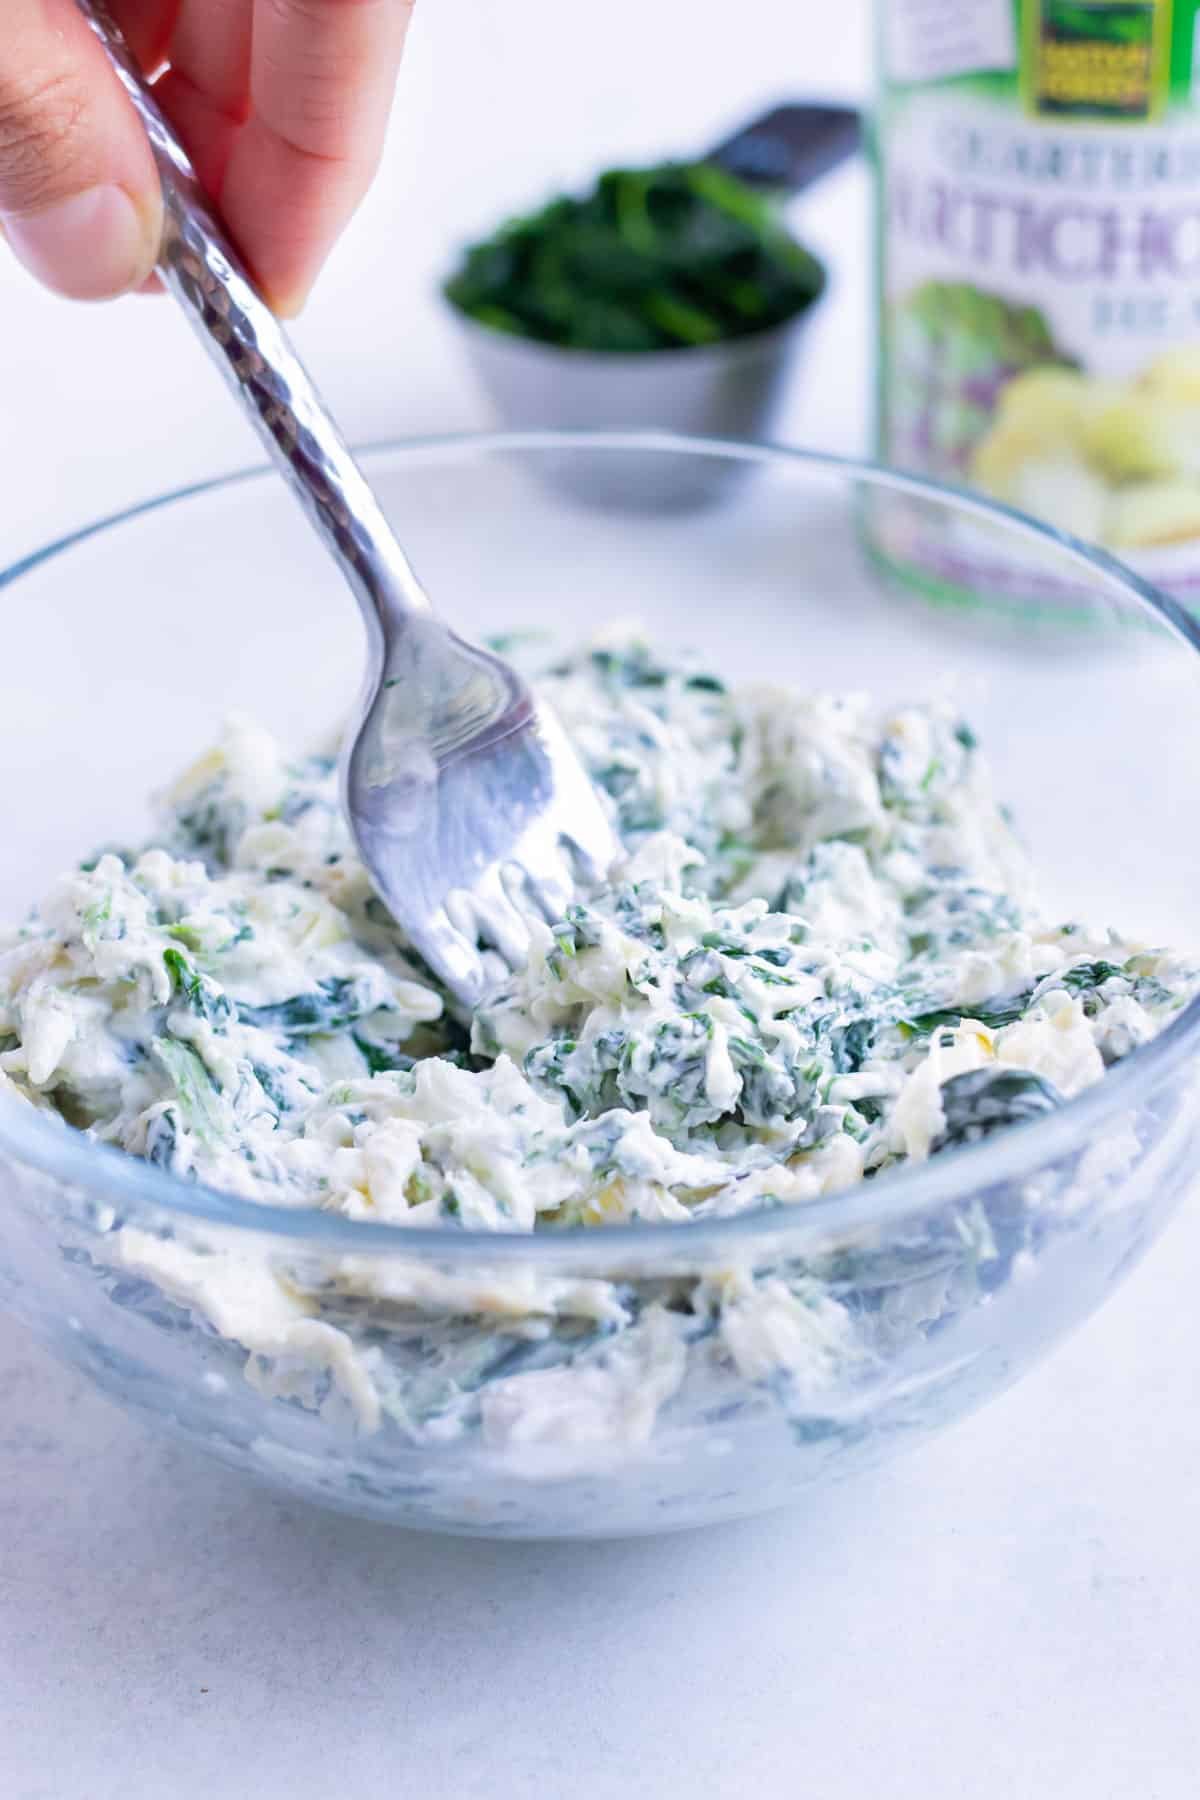 Low carb spinach artichoke filling is combined in a bowl for this easy main dish.